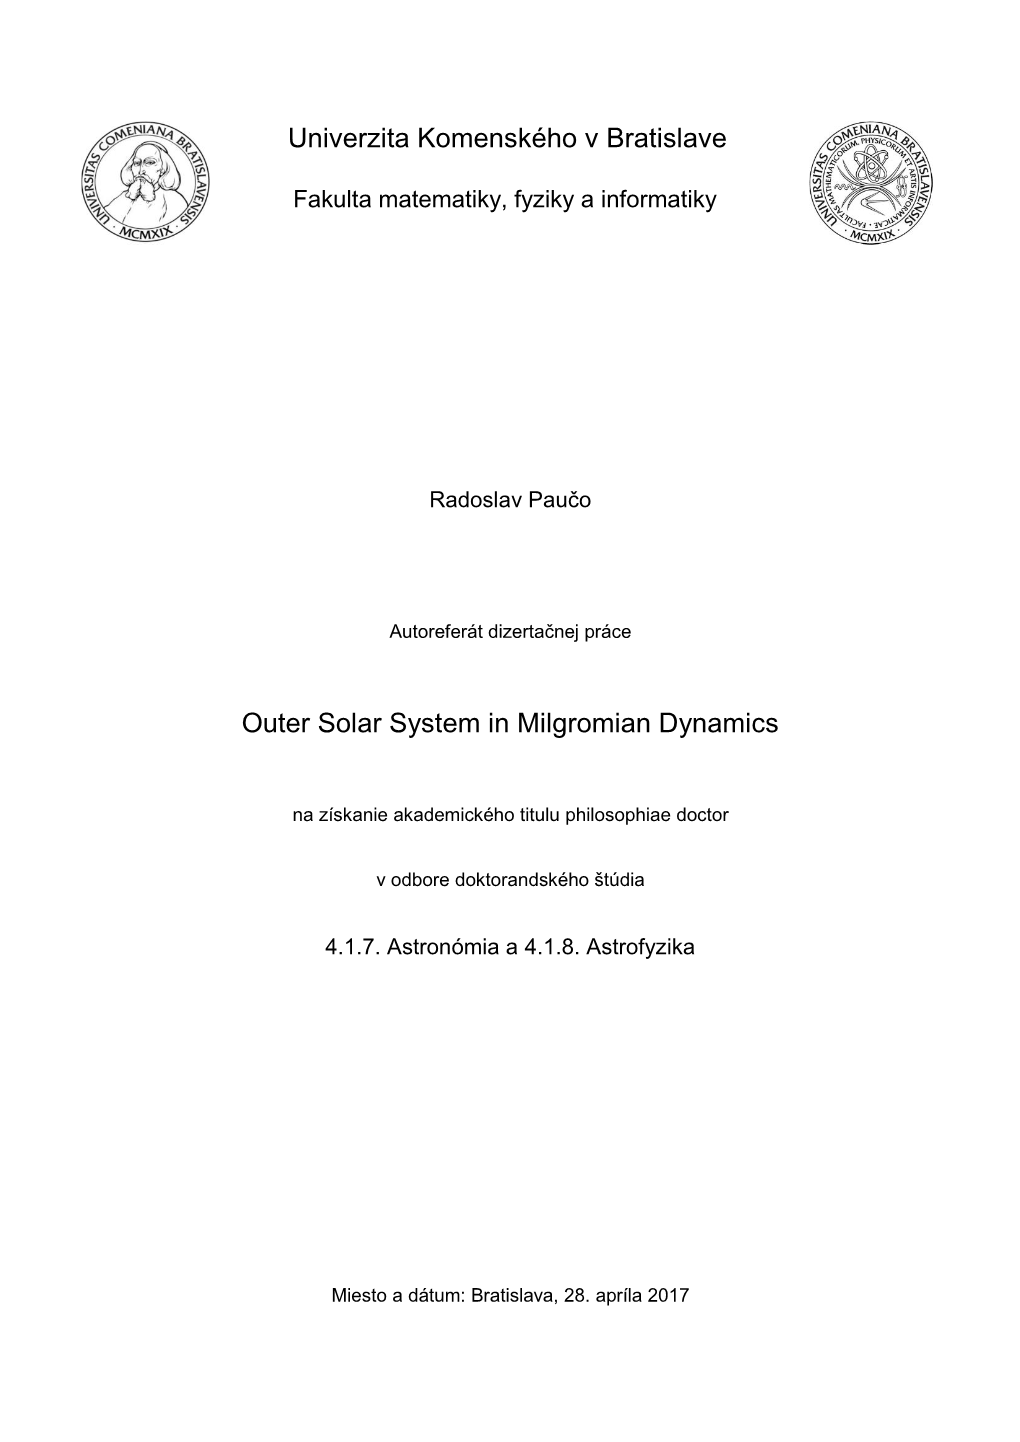 Outer Solar System in Milgromian Dynamics